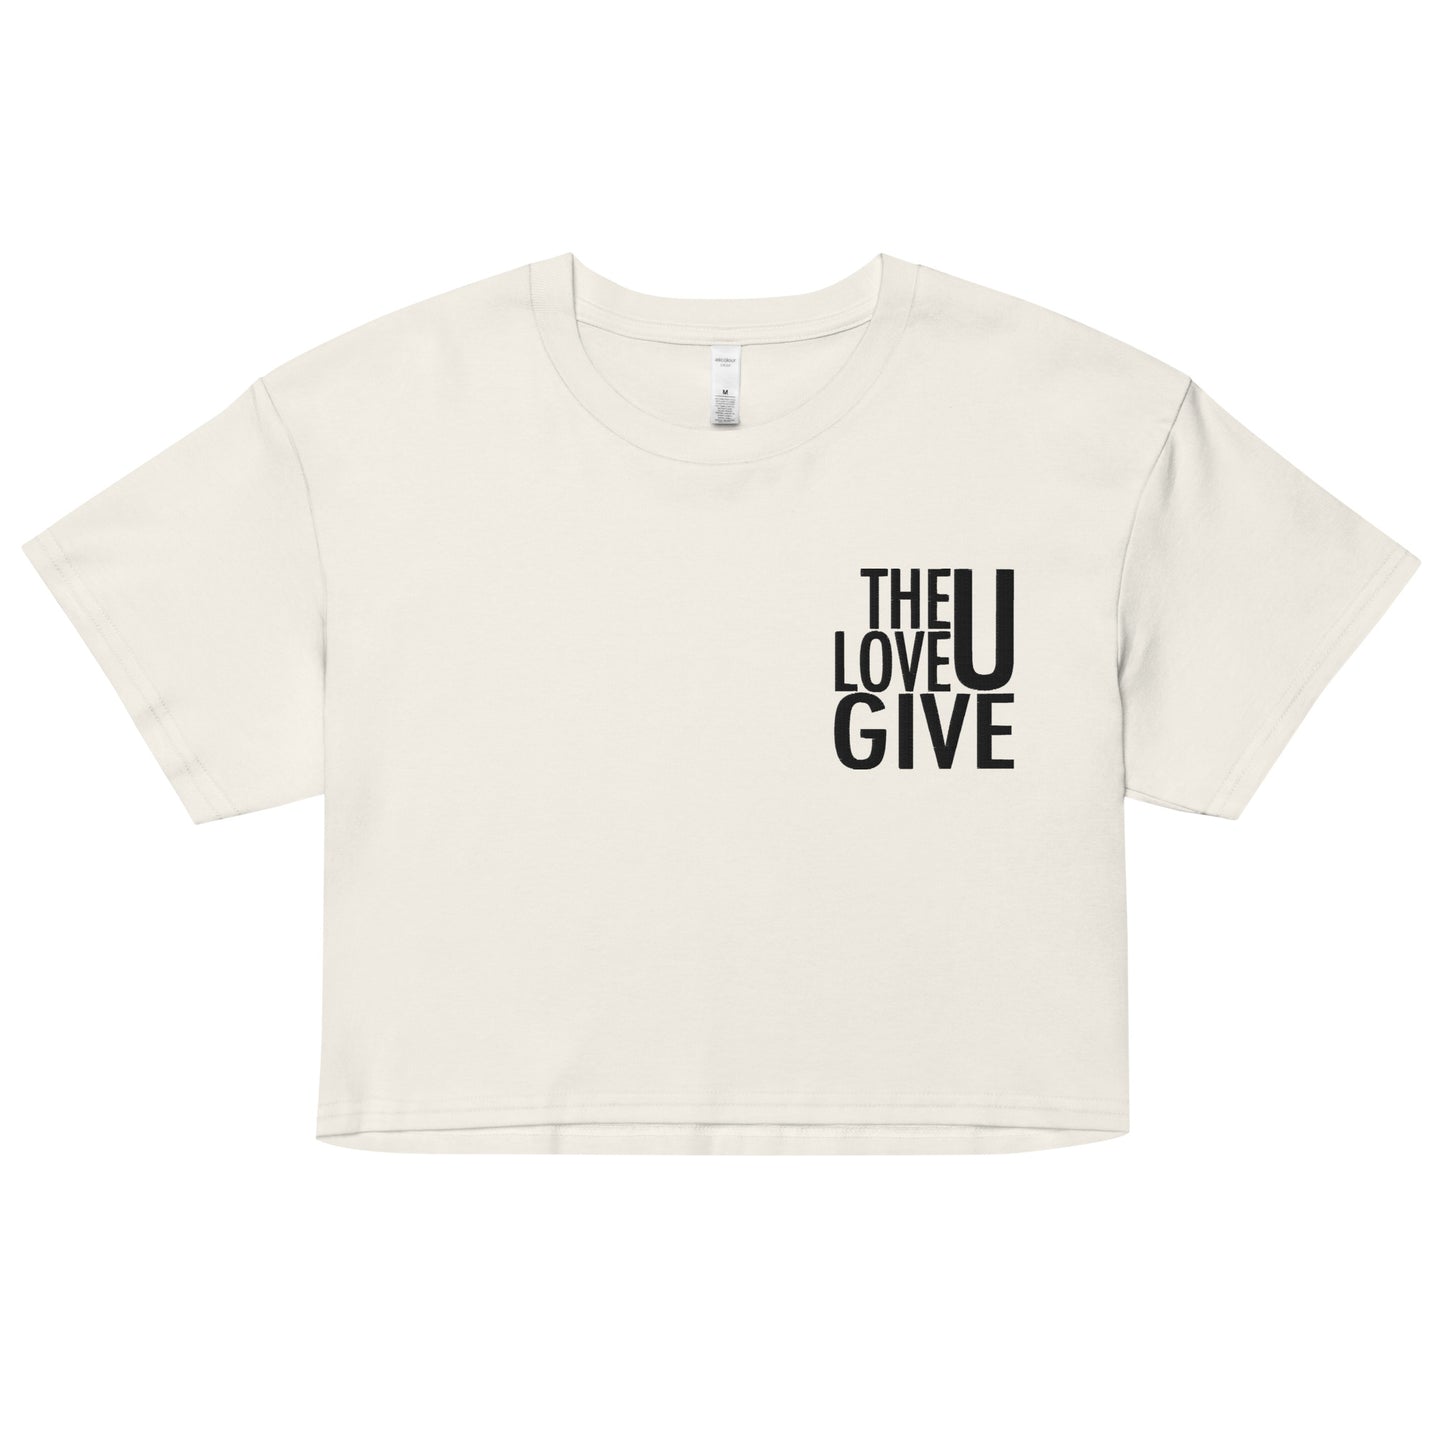 TheLoveUGive Unisex crop top